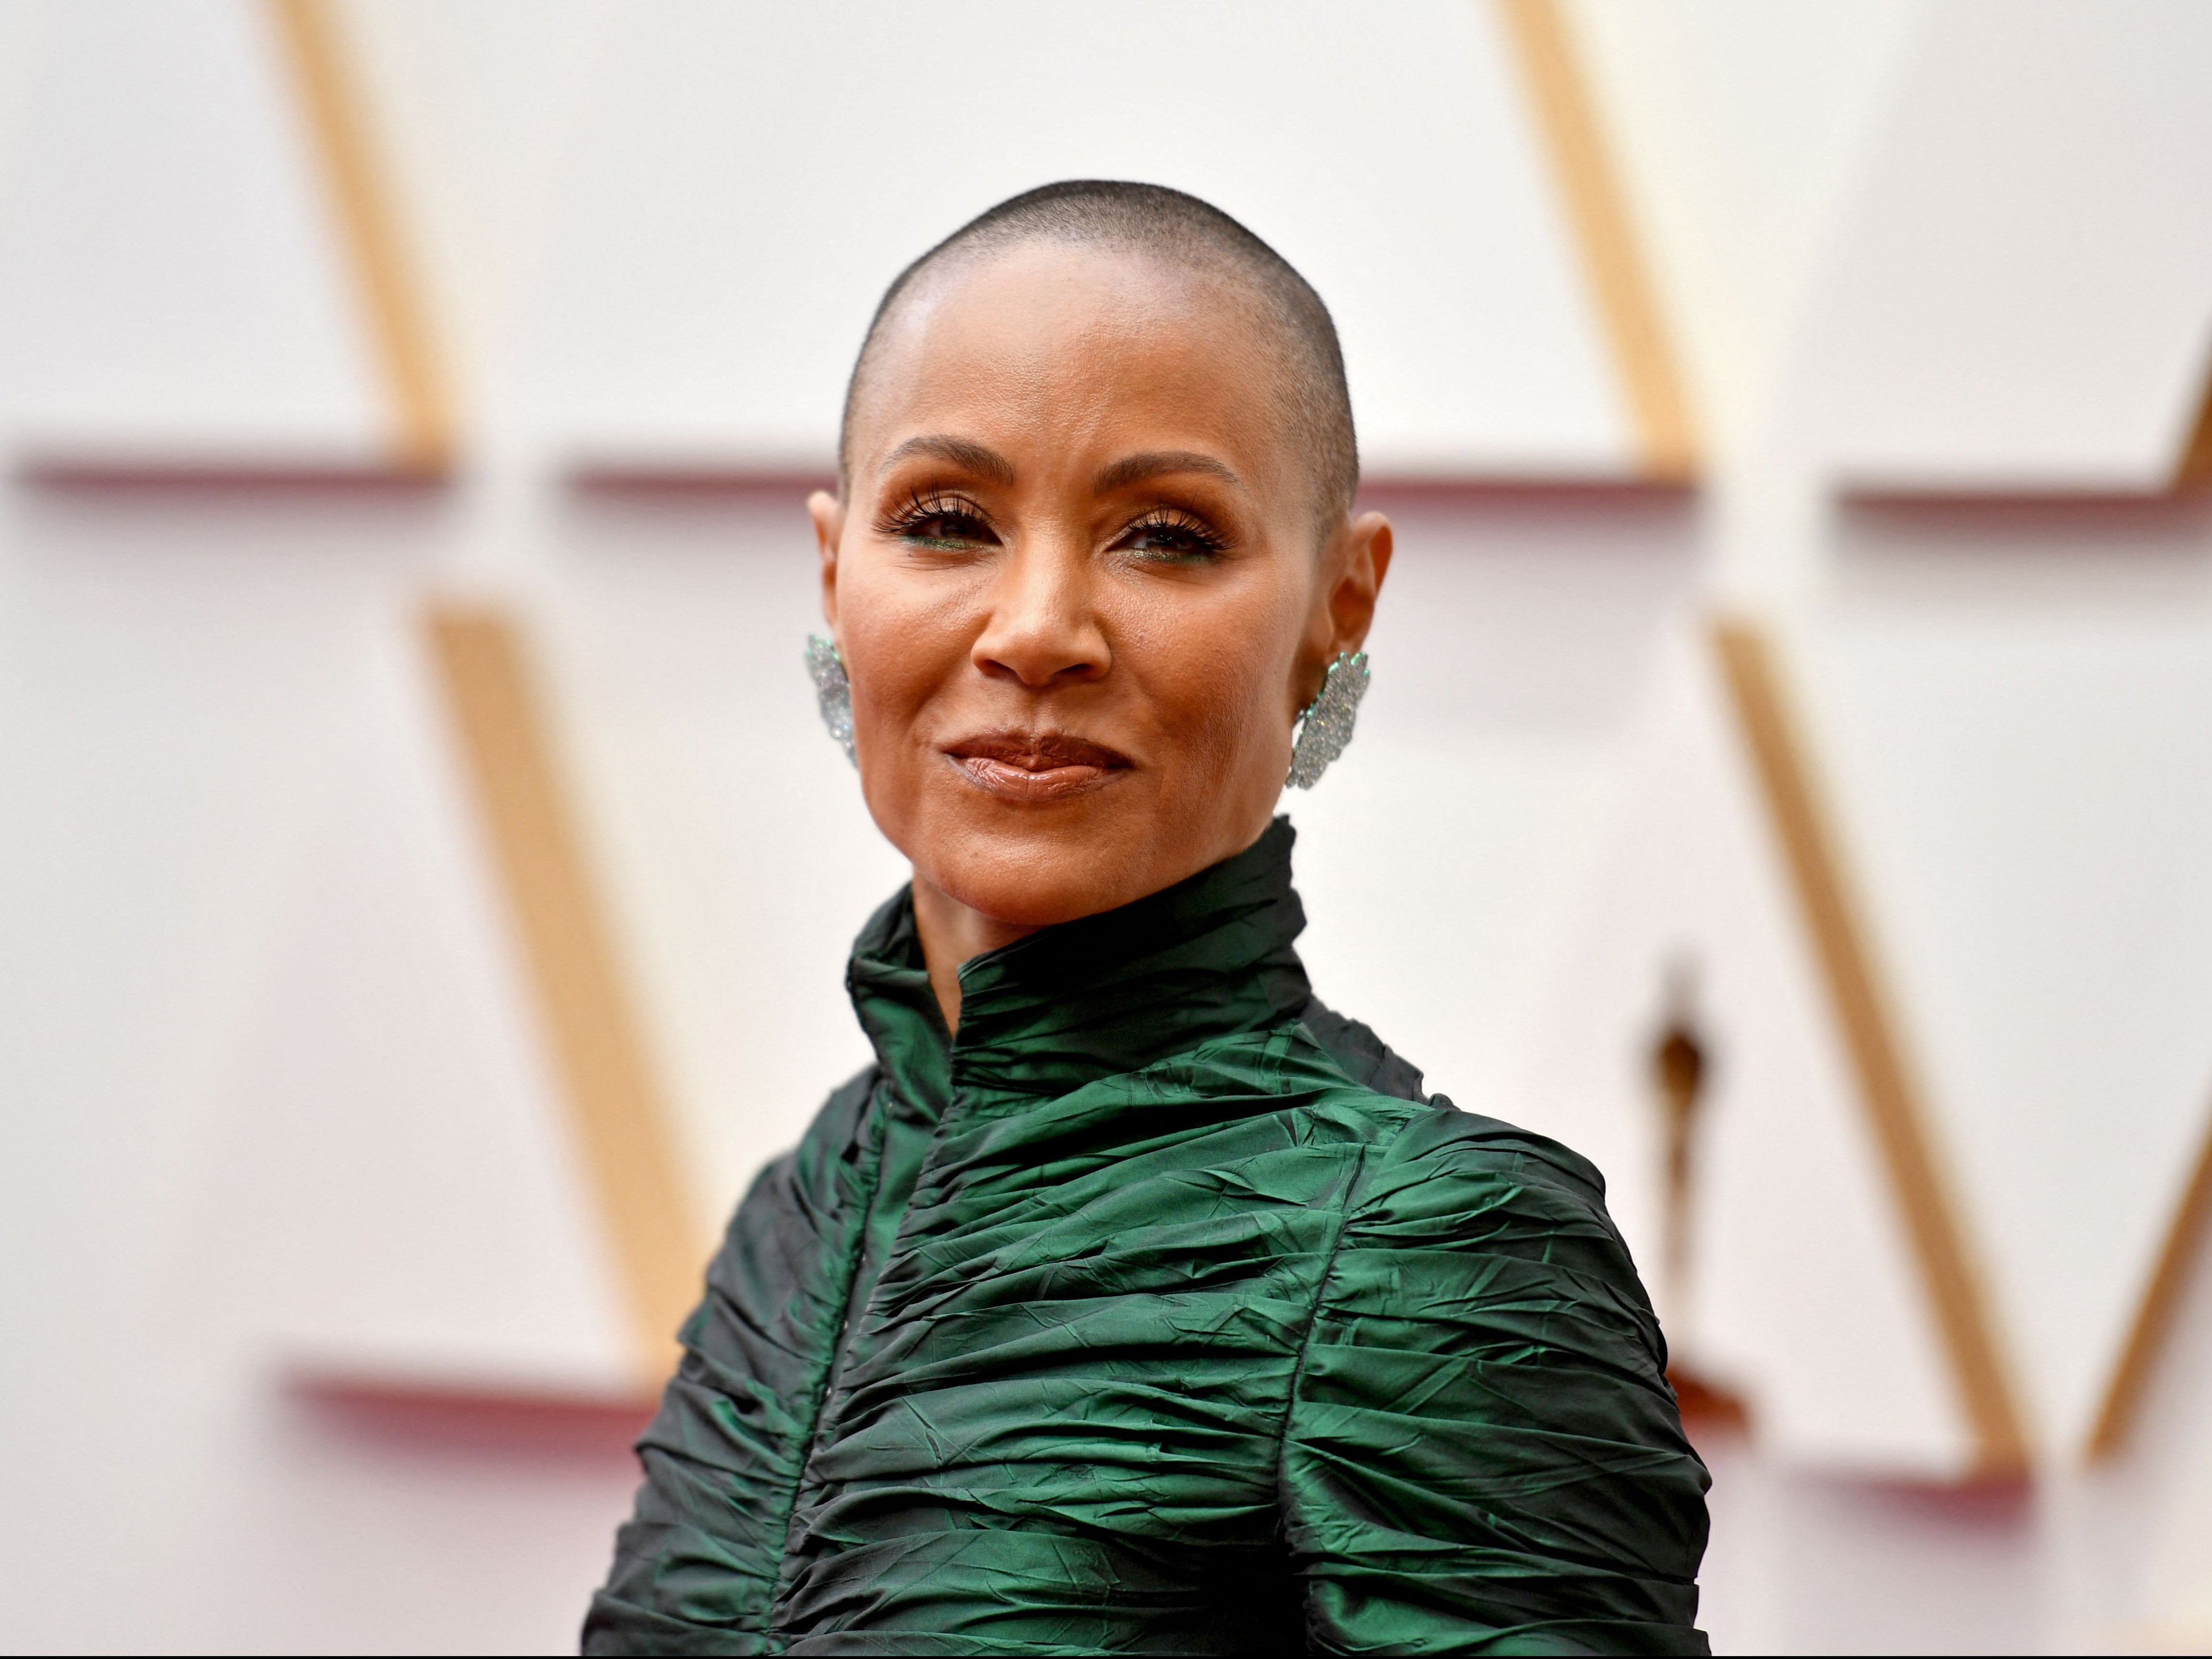 US actress Jada Pinkett Smith attends the 94th Oscars at the Dolby Theatre in Hollywood, California